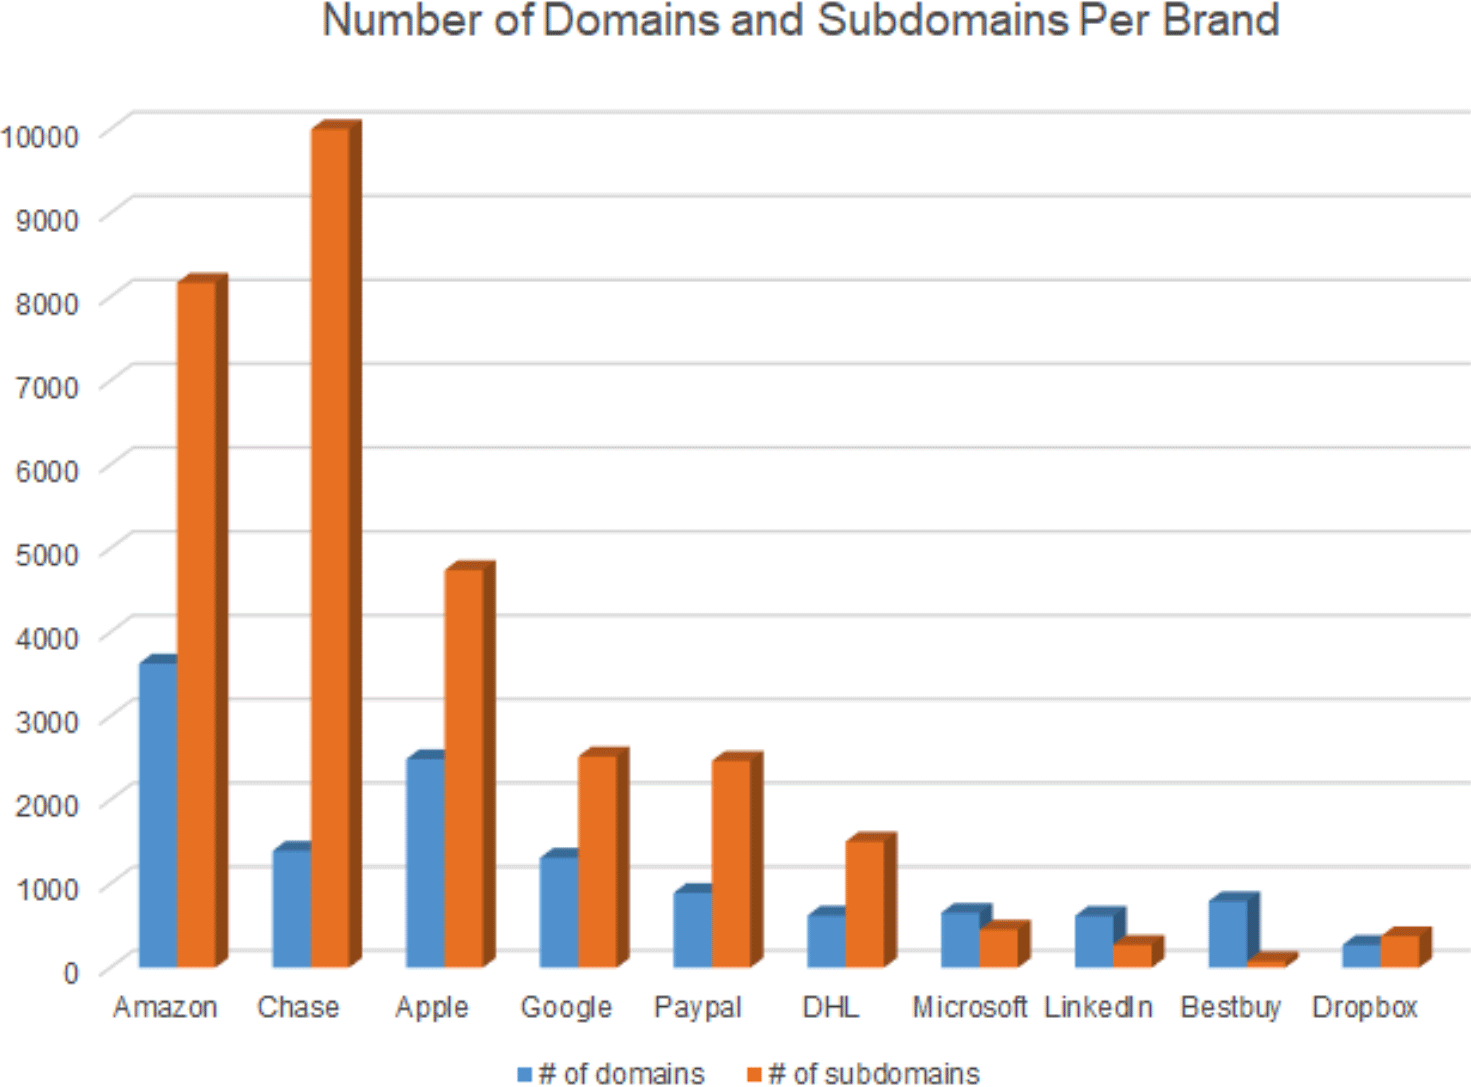 Q2 2021 Top 10 Most Impersonated Brands in Domains 21